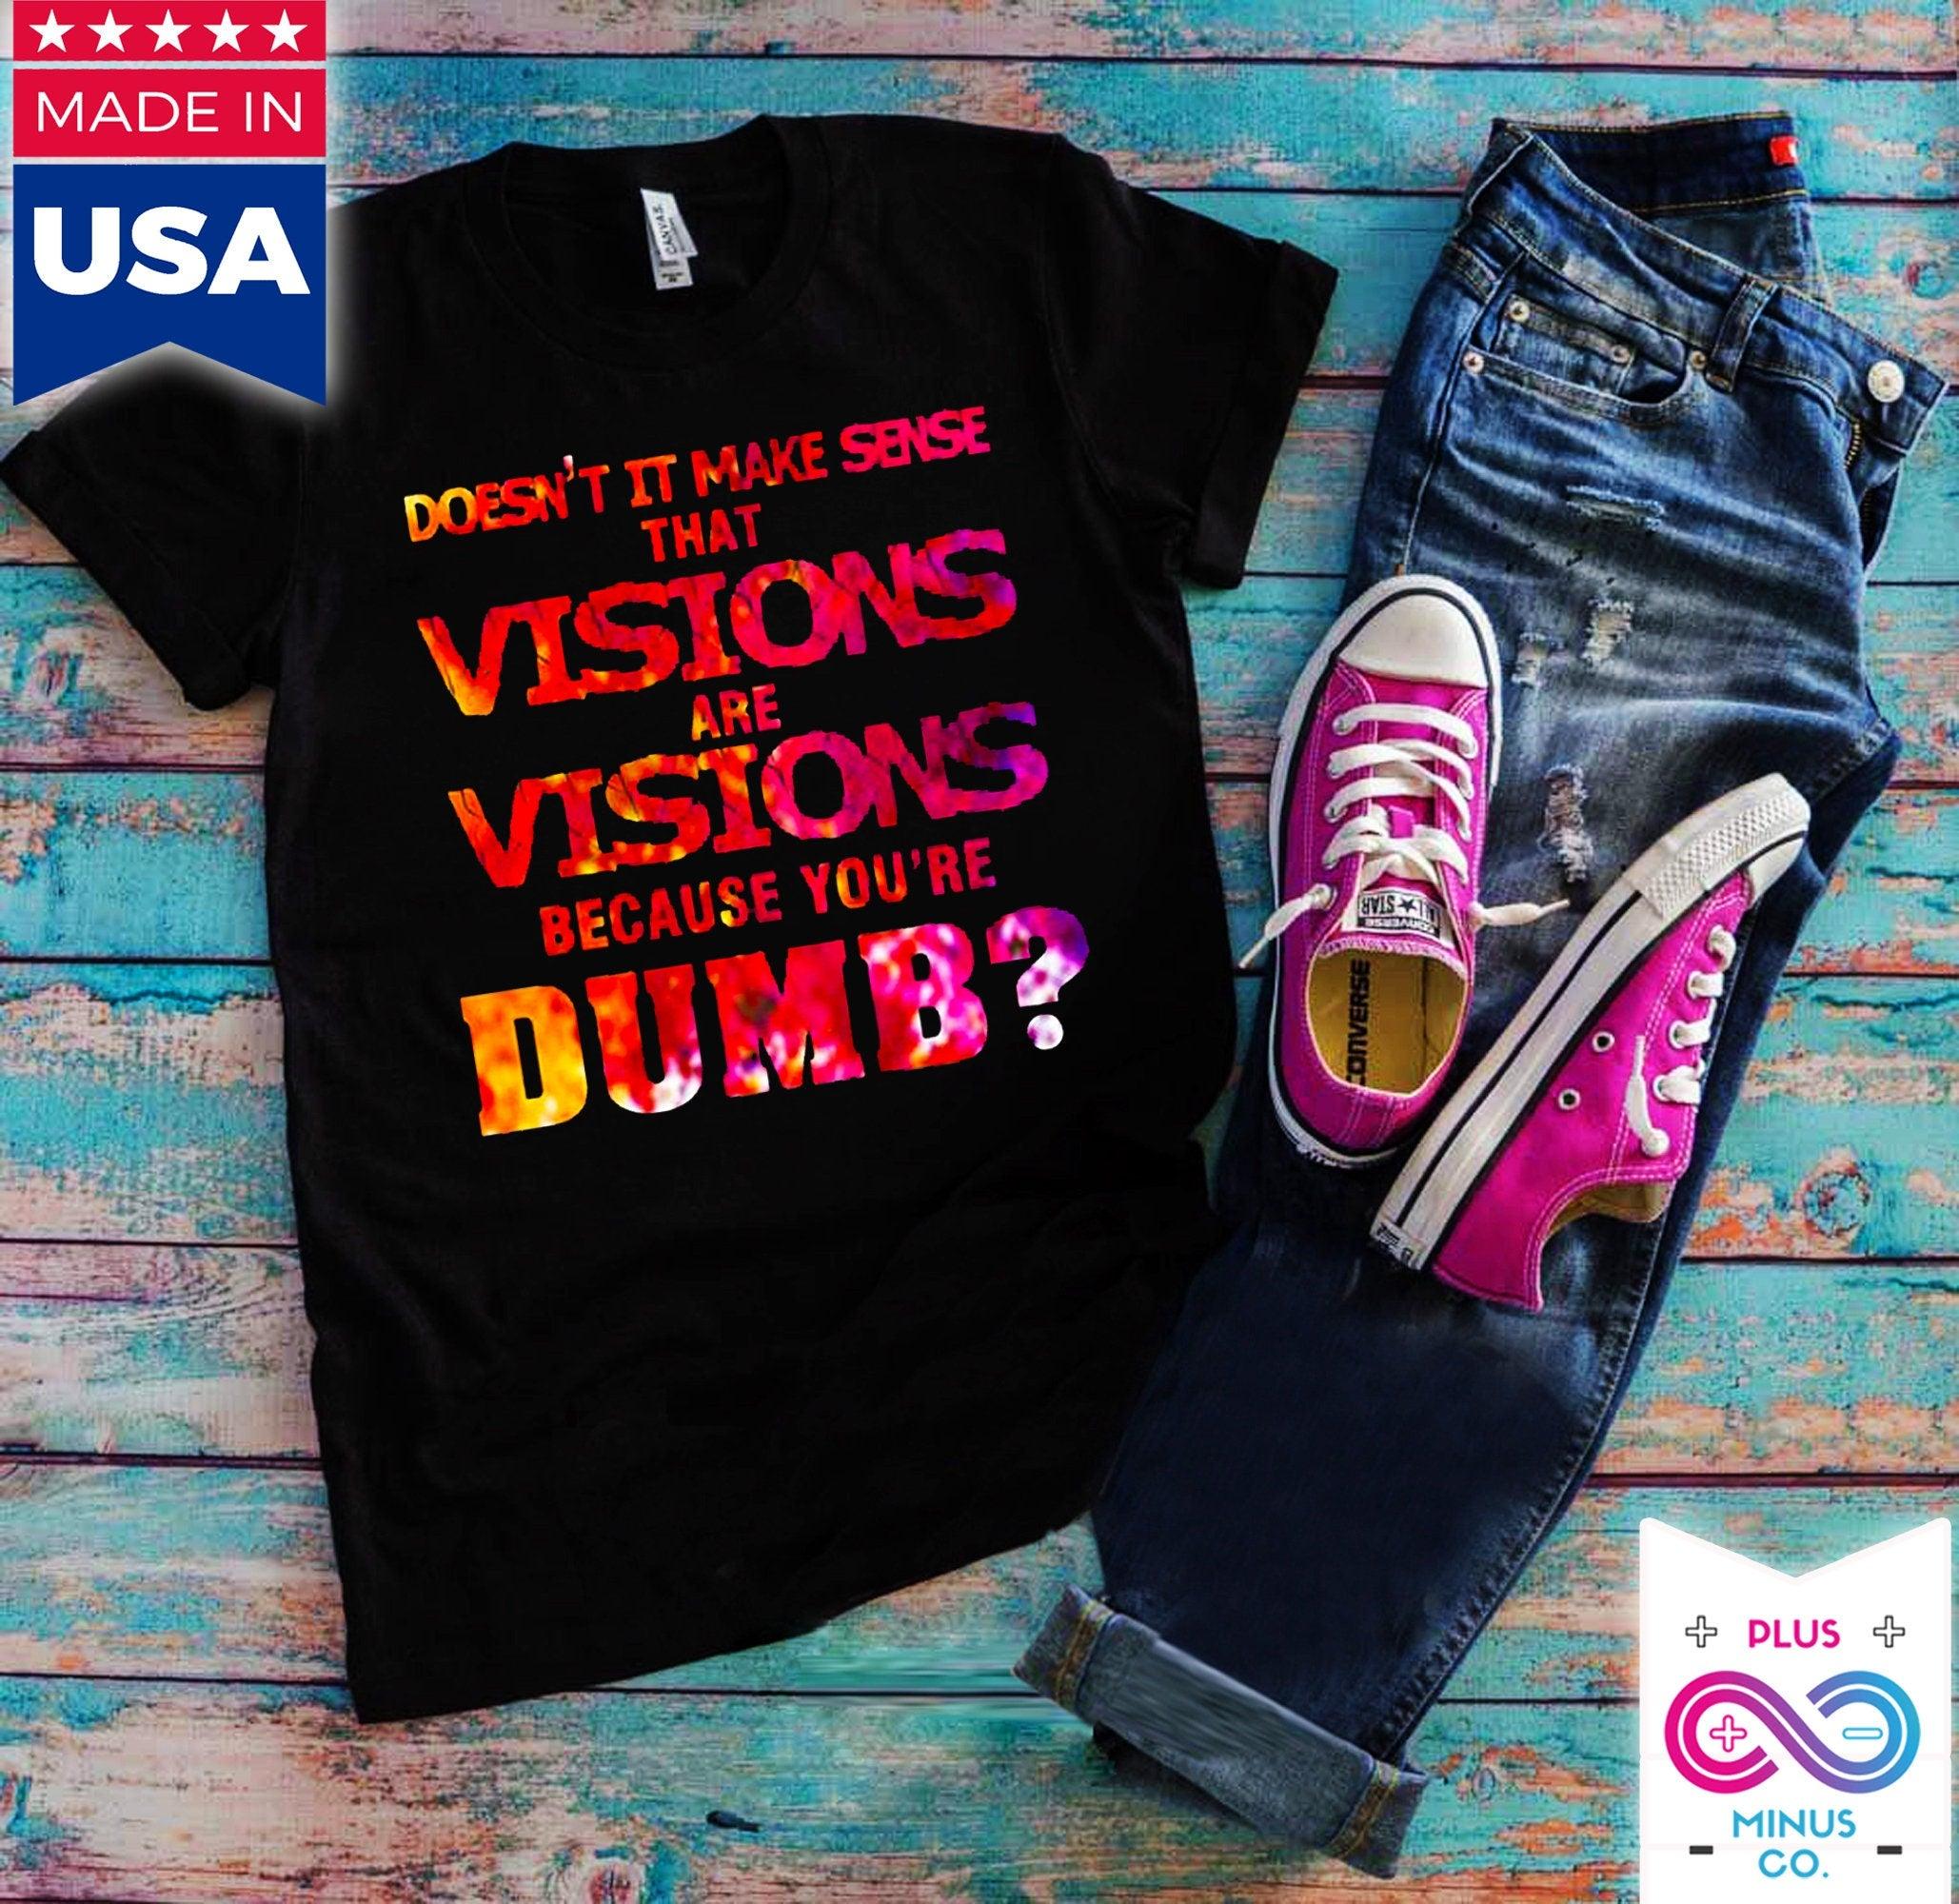 Visions are Visions because you are Dumb  T-Shirts,Funny Tshirt, Sarcastic, Novelty, For Women, Mother's Day, Gift - plusminusco.com